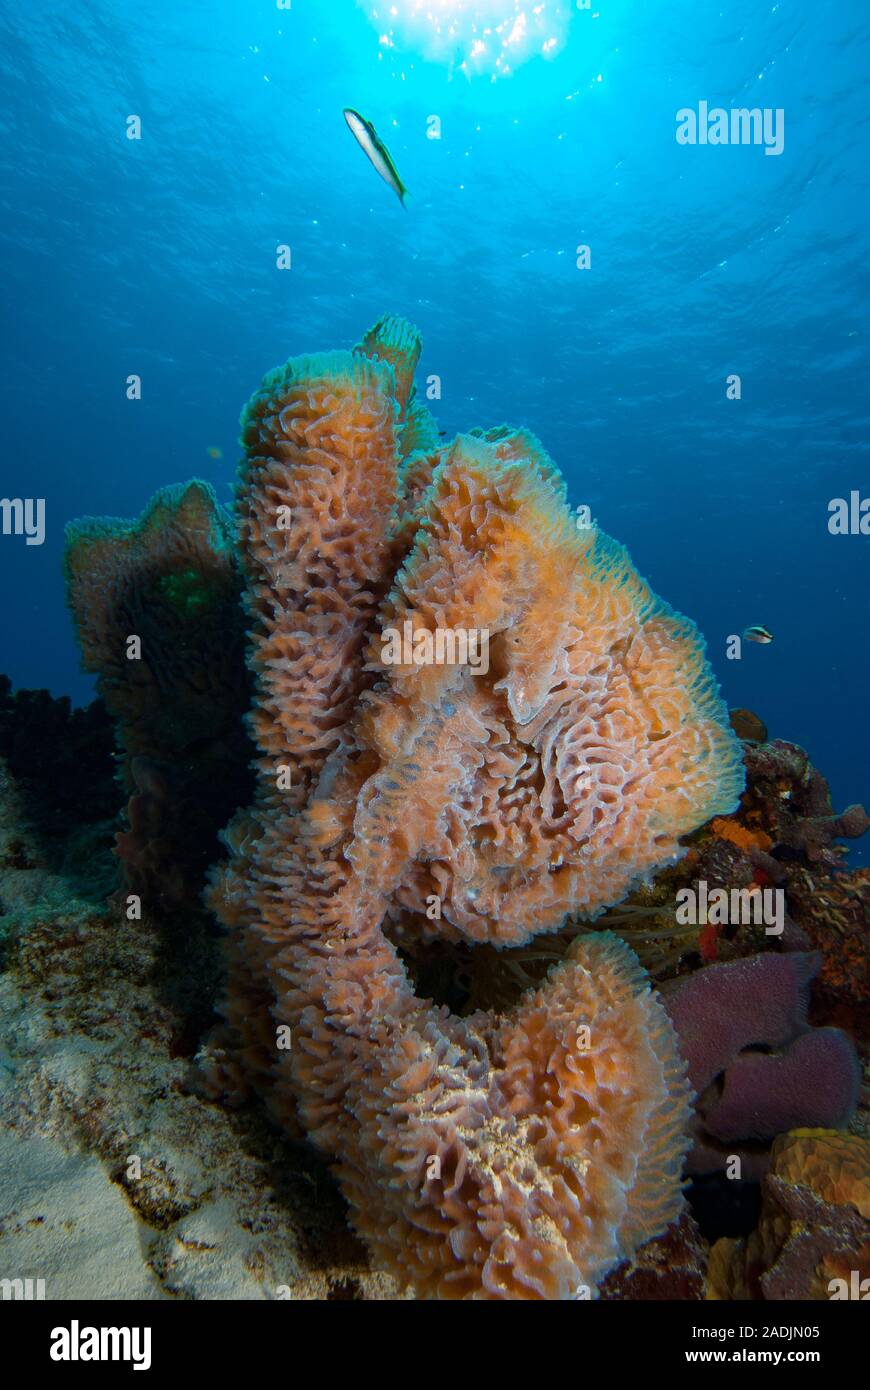 Cozumel Mexico Underwater Tropical Coral Reef Stock Photo